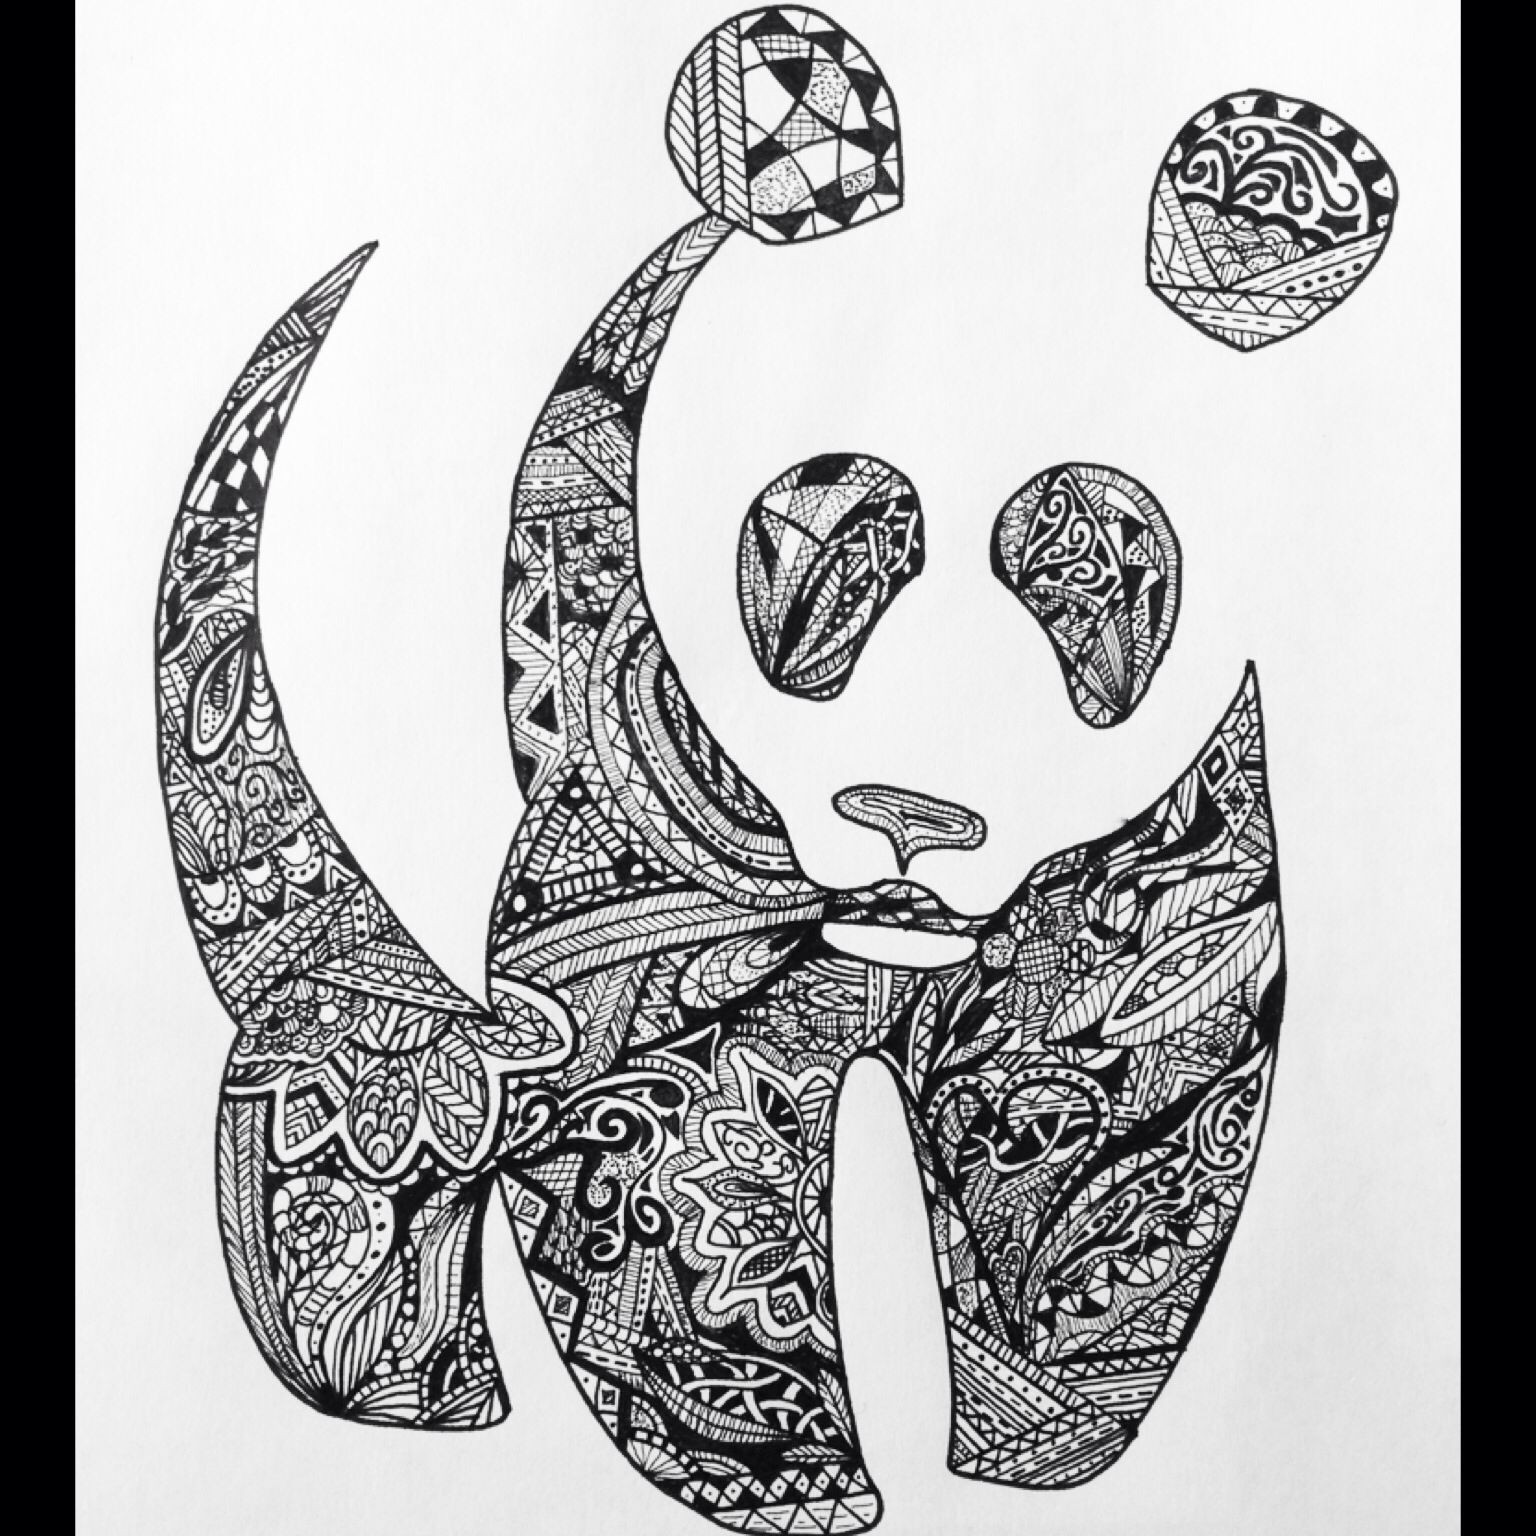 Panda Coloring Pages For Adults
 Panda zentangle